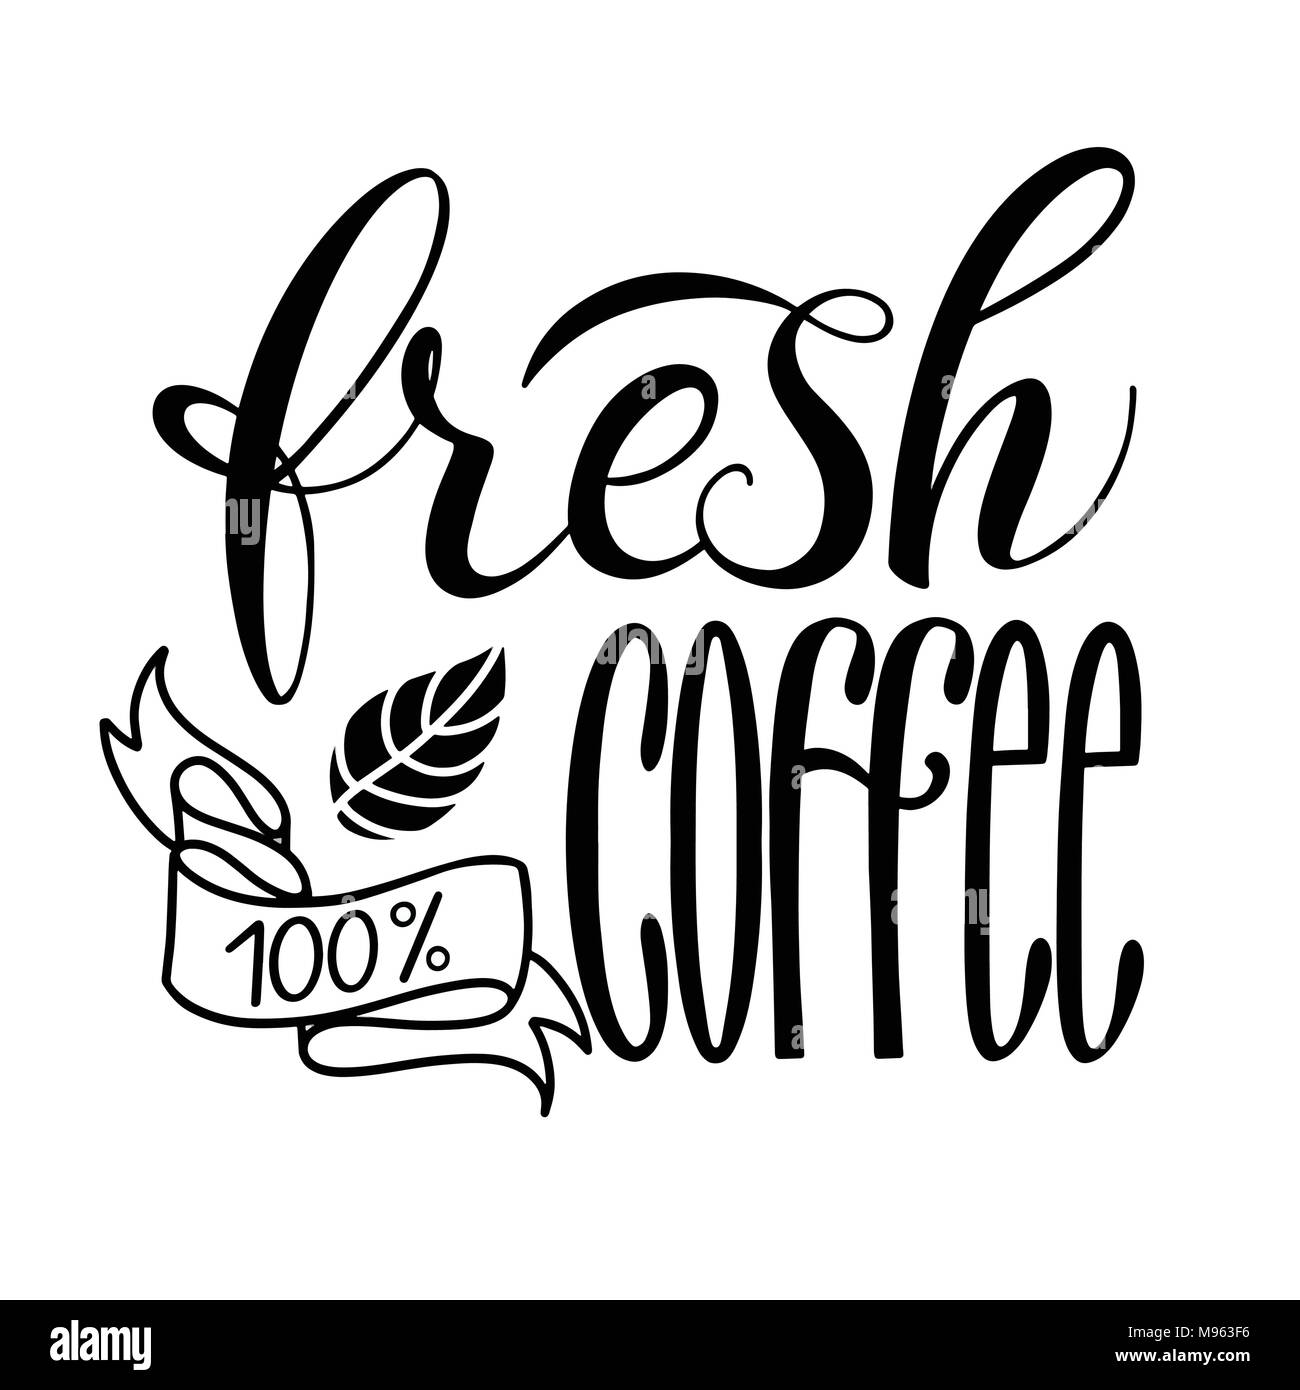 Lettering Fresh and Natural Coffee 100. Calligraphic handdrawn sign. Coffee quote Stock Vector